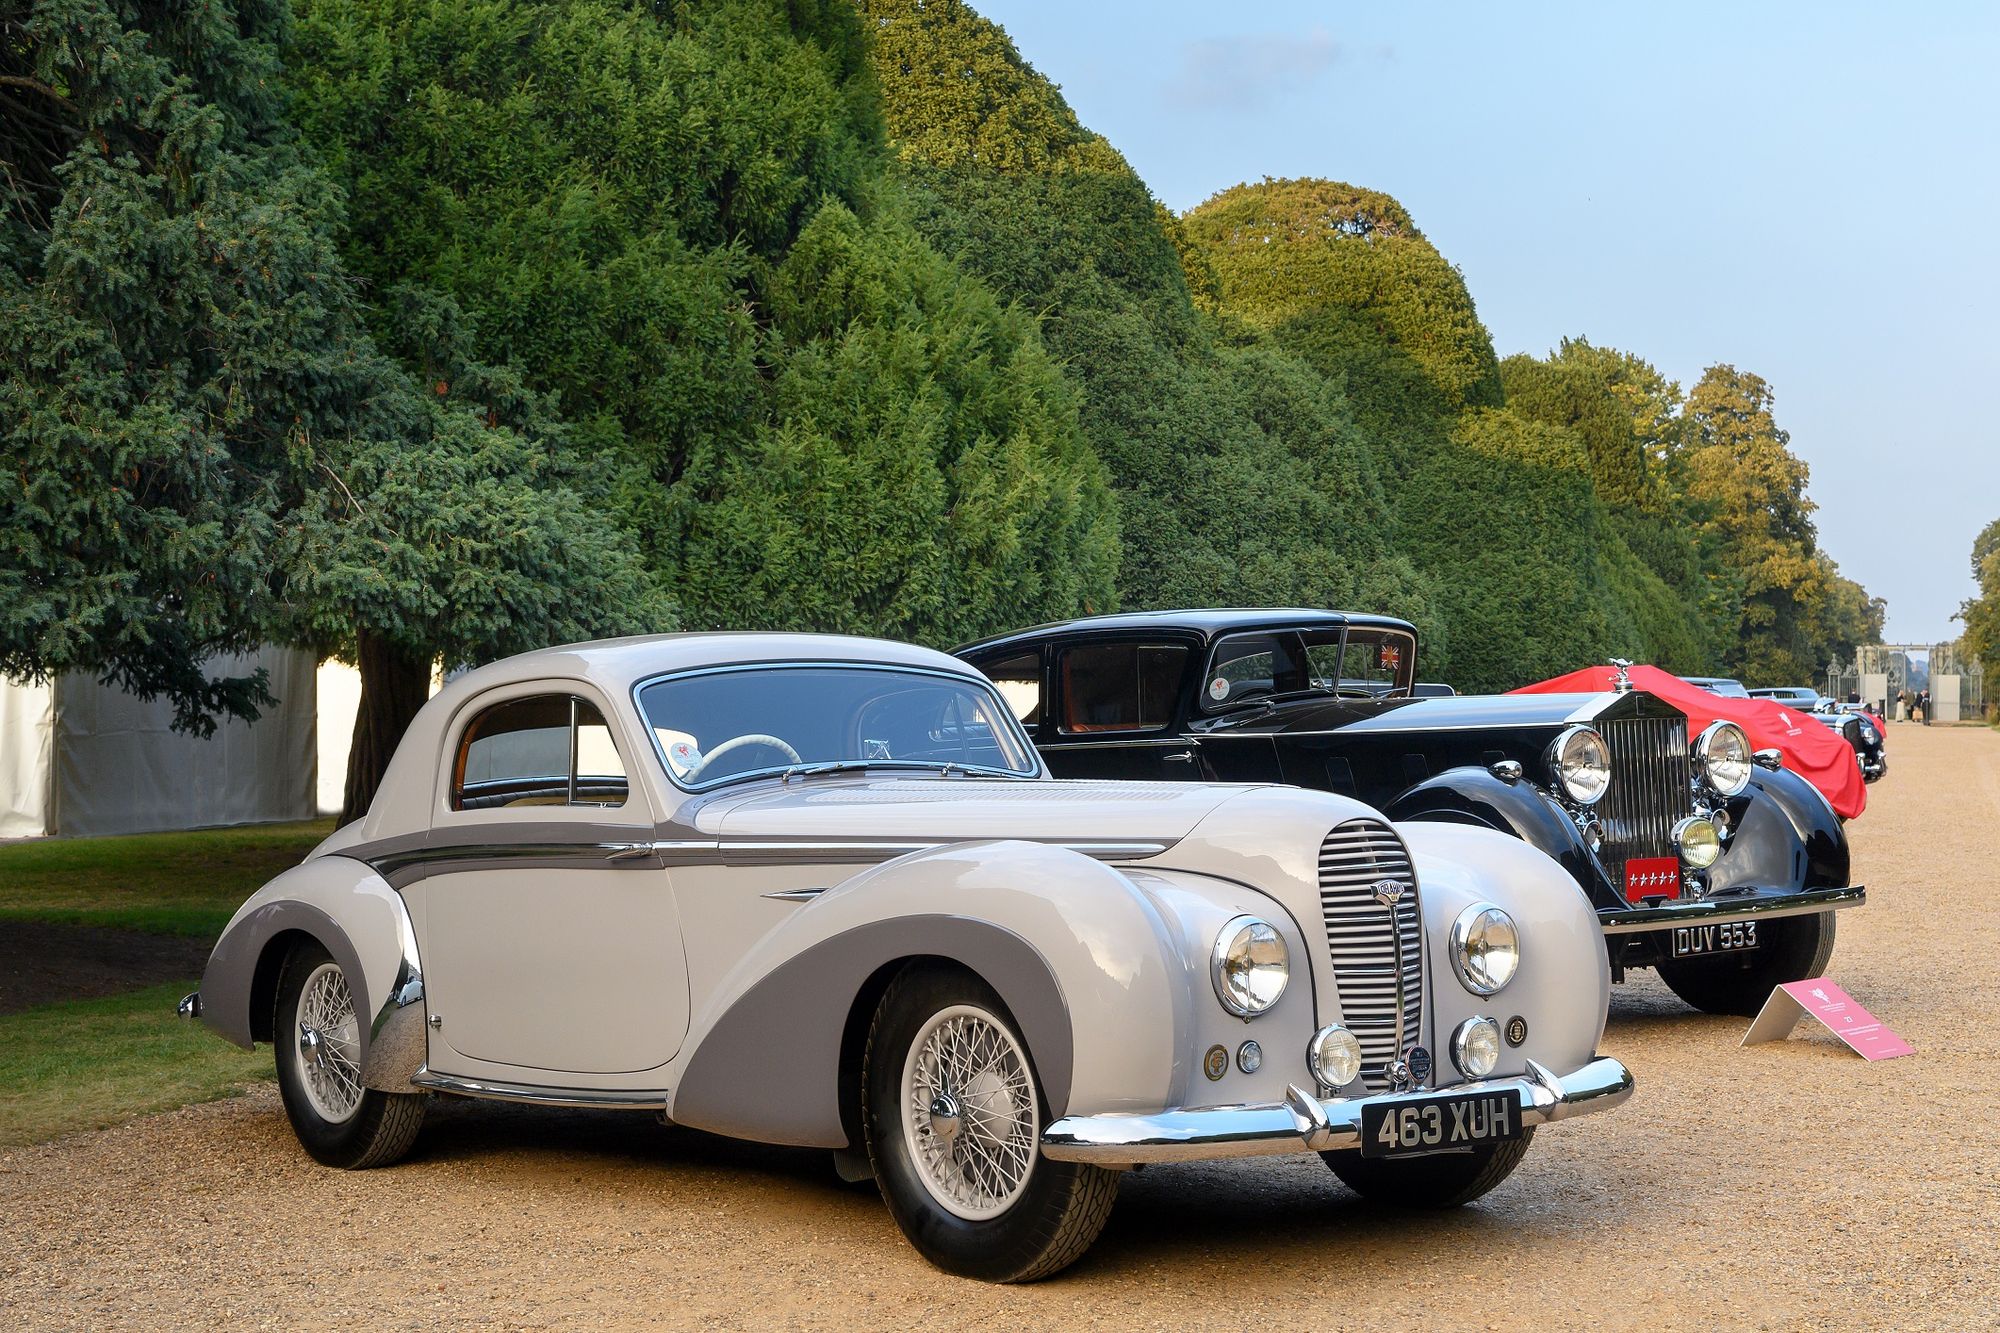 Concours of Elegance 2021 Hamptons Court Delahaye 135M Fixed Head Coupé by Chapron 1940s class winner